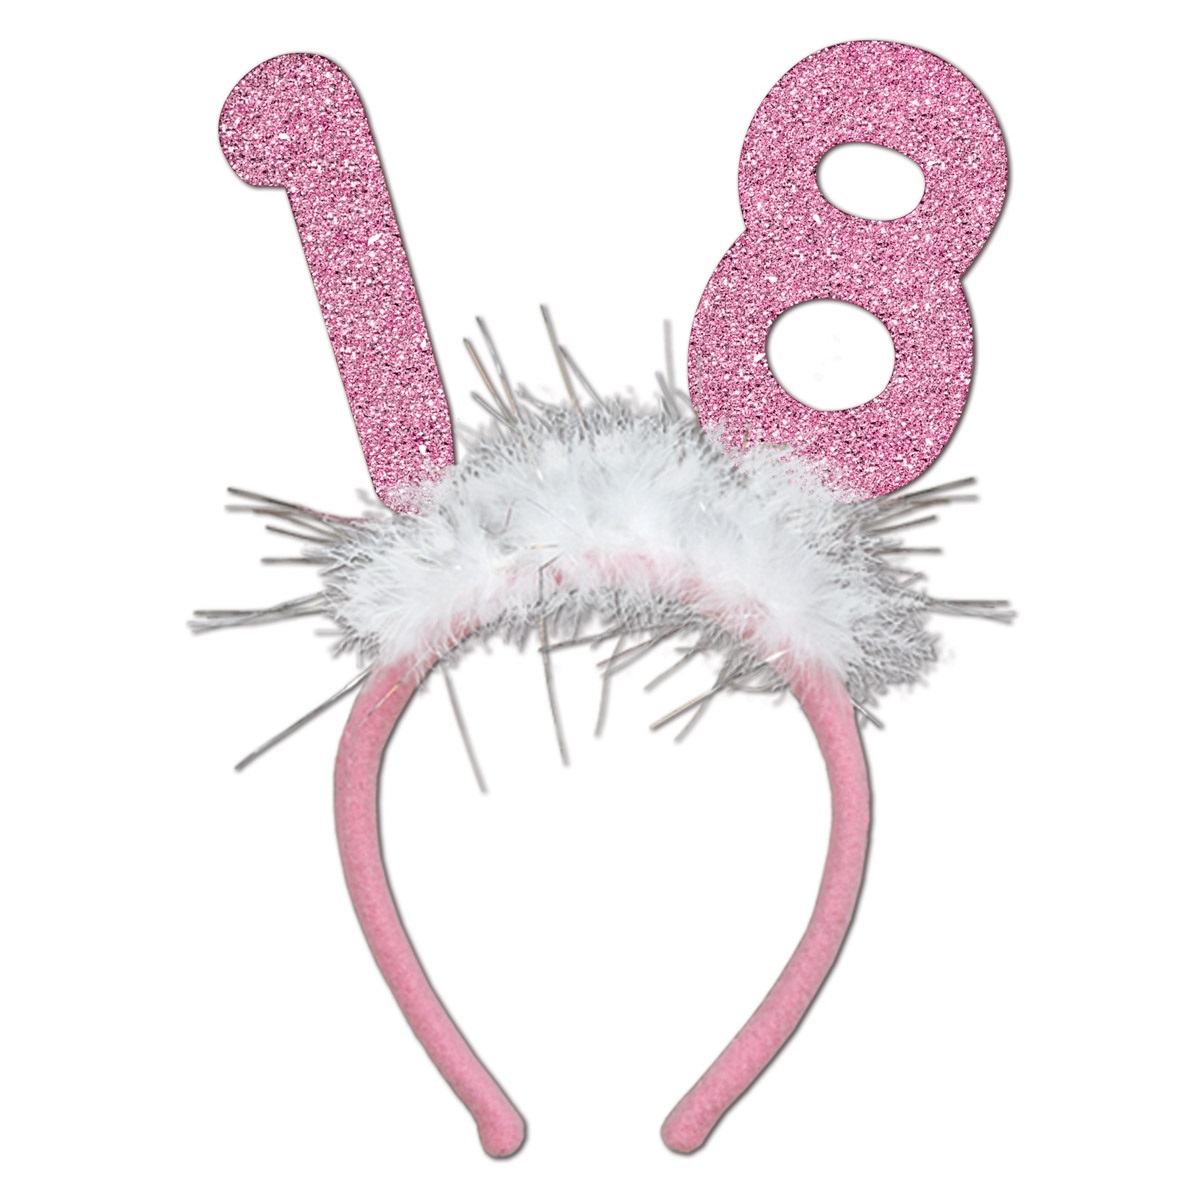 Beistle Club Pack of 12 Pink Glittered "18" Bopper Headband Party Favor Costume Accessories